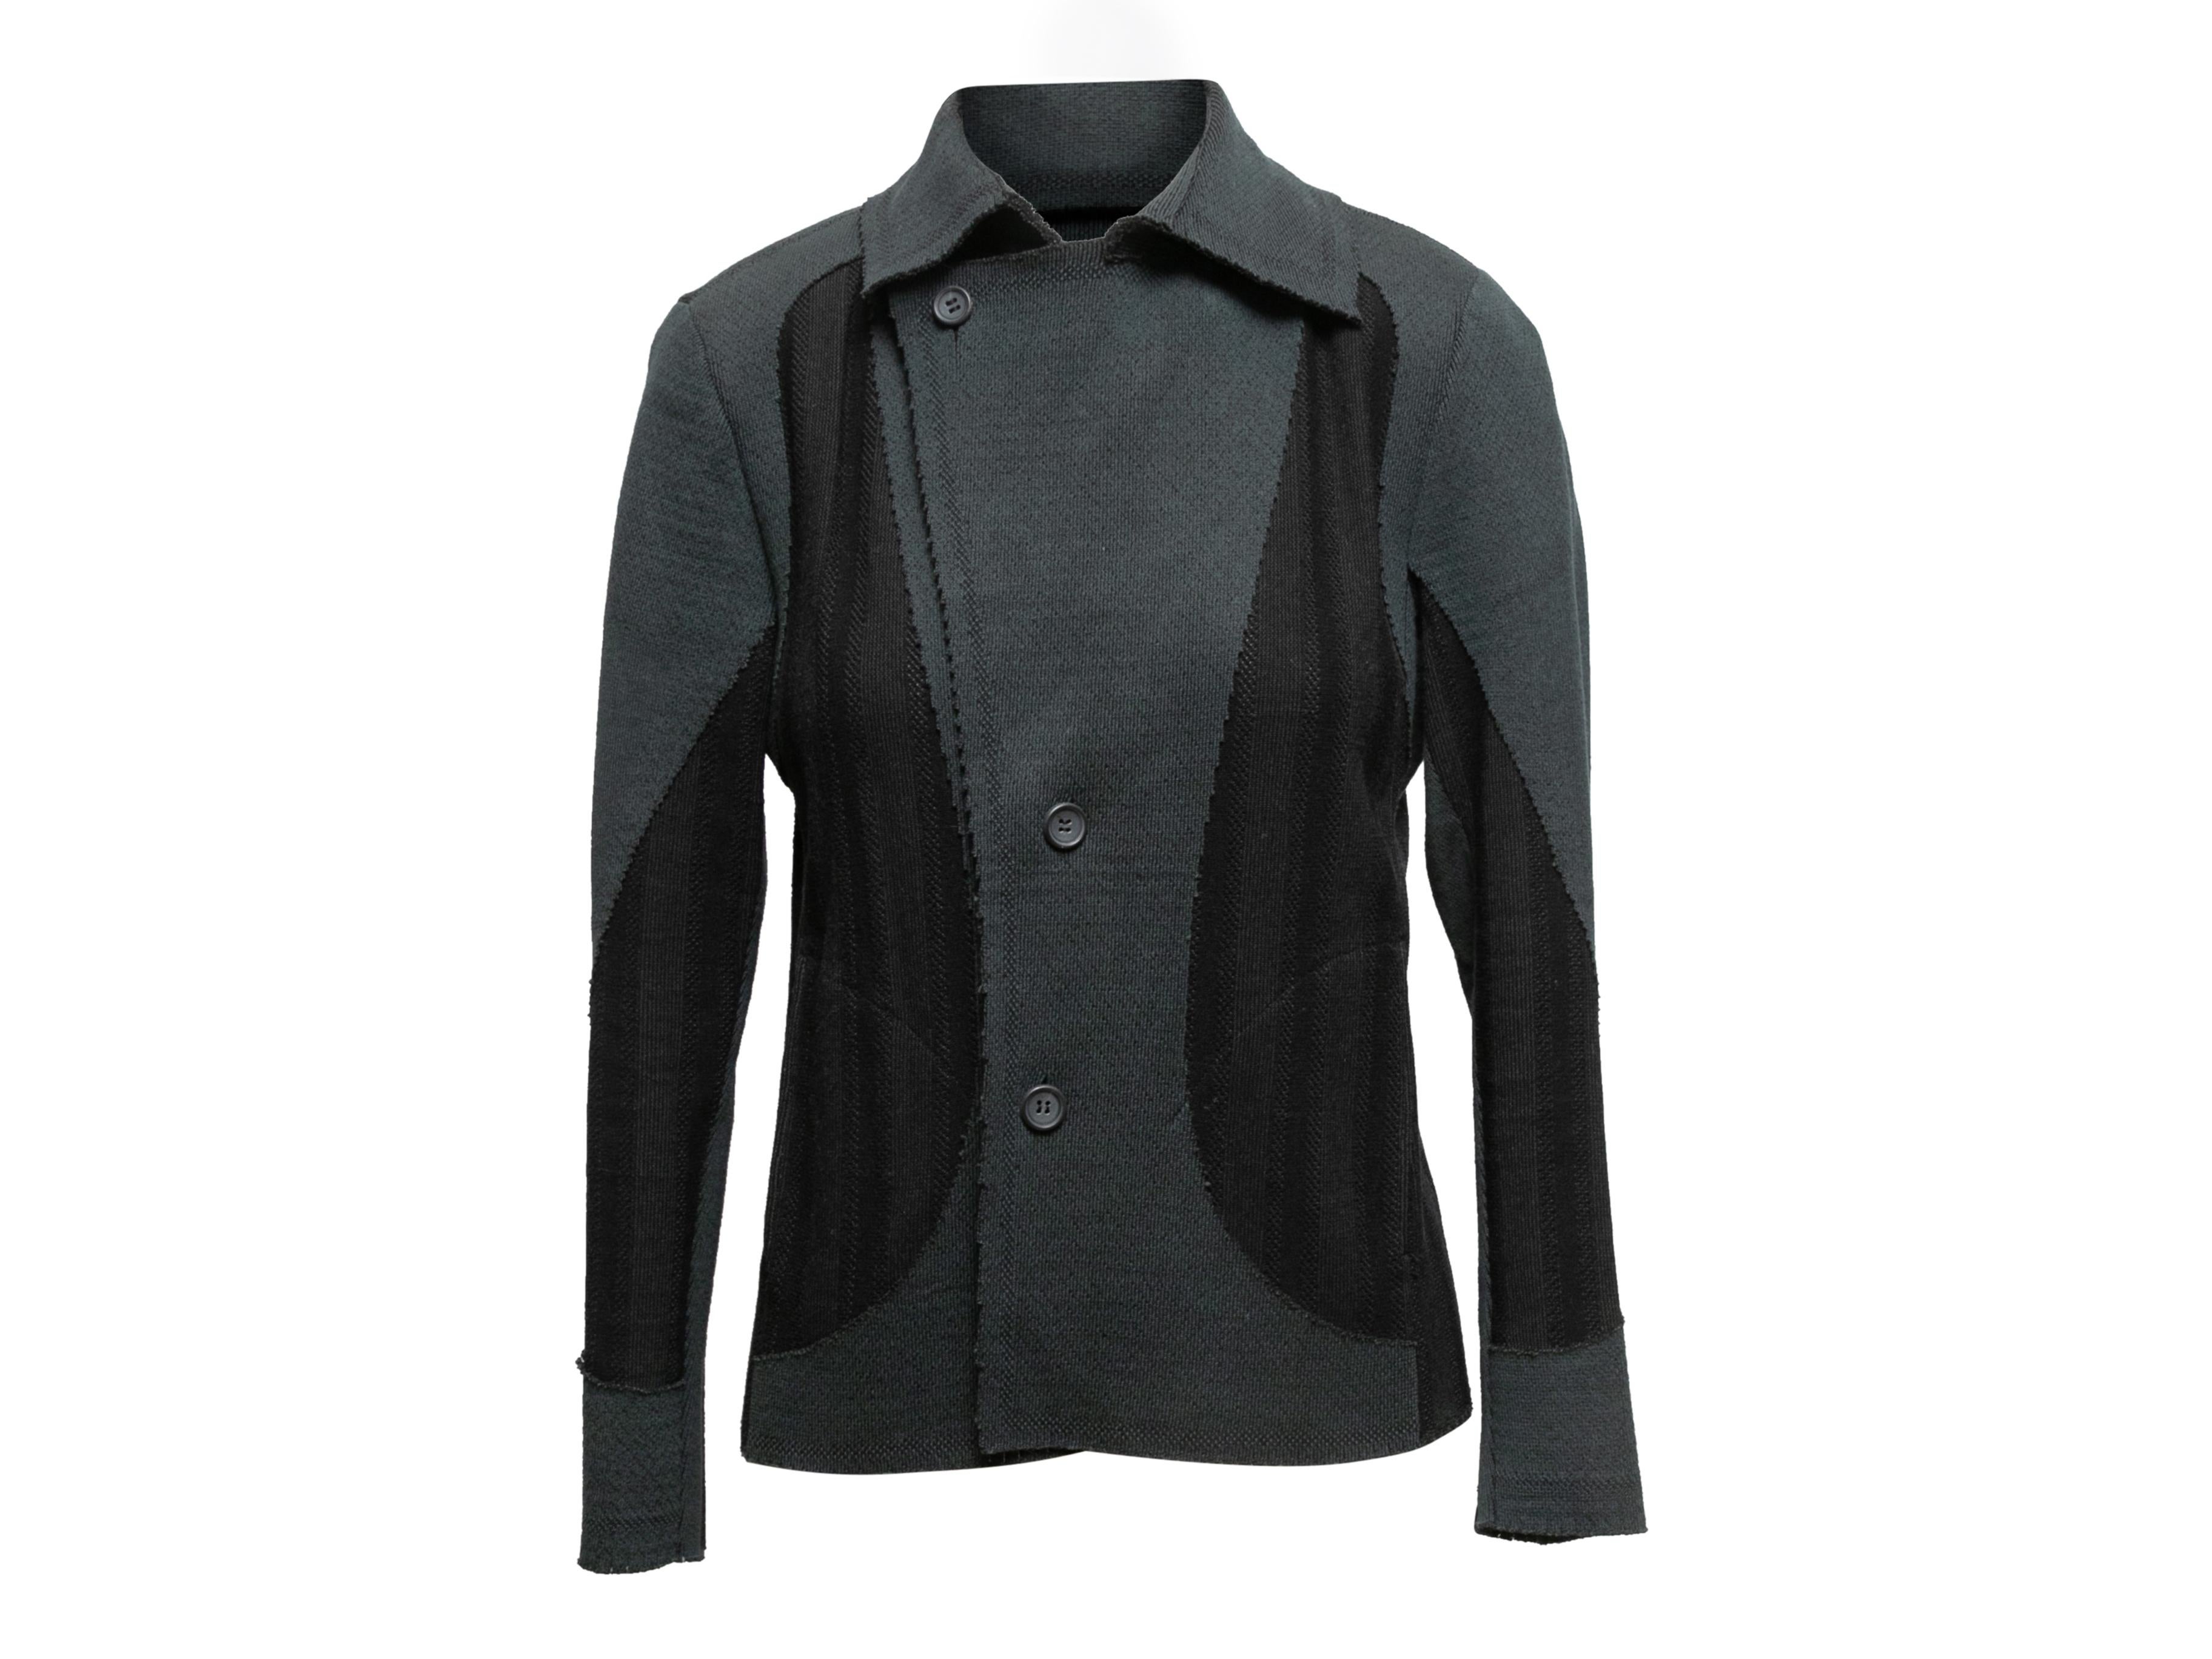 Slate and black knit jacket by Issey Miyake. Notched lapel. Button closures at front. 40